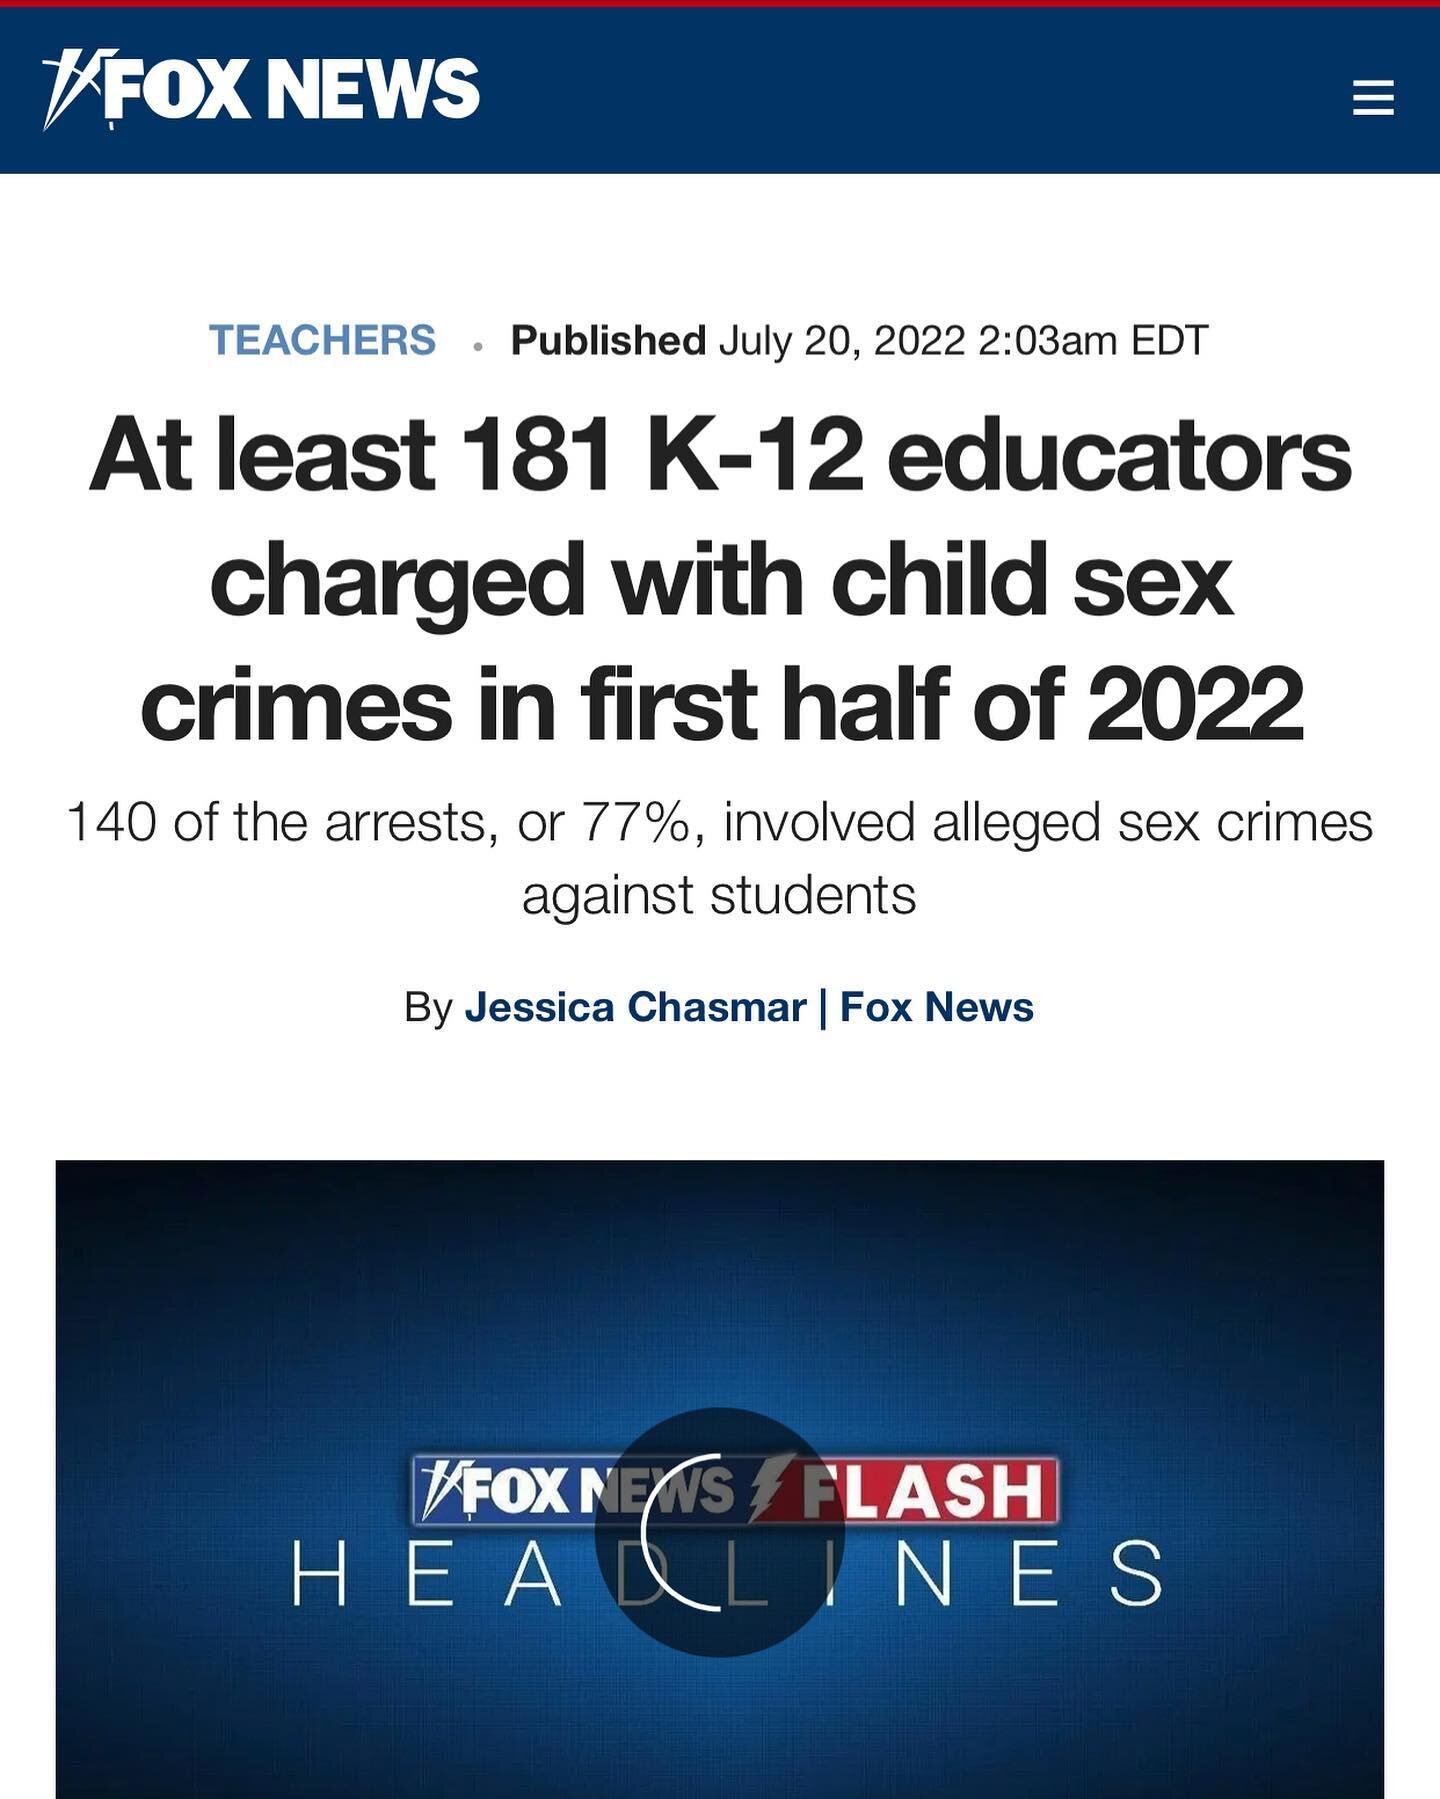 Comprehensive Sex Ed is grooming which results in child sexual exploitation and sex trafficking. Go to our website to be sure your child does not have one of these curriculum or books in school. Any teacher willing to teach this material is complicit